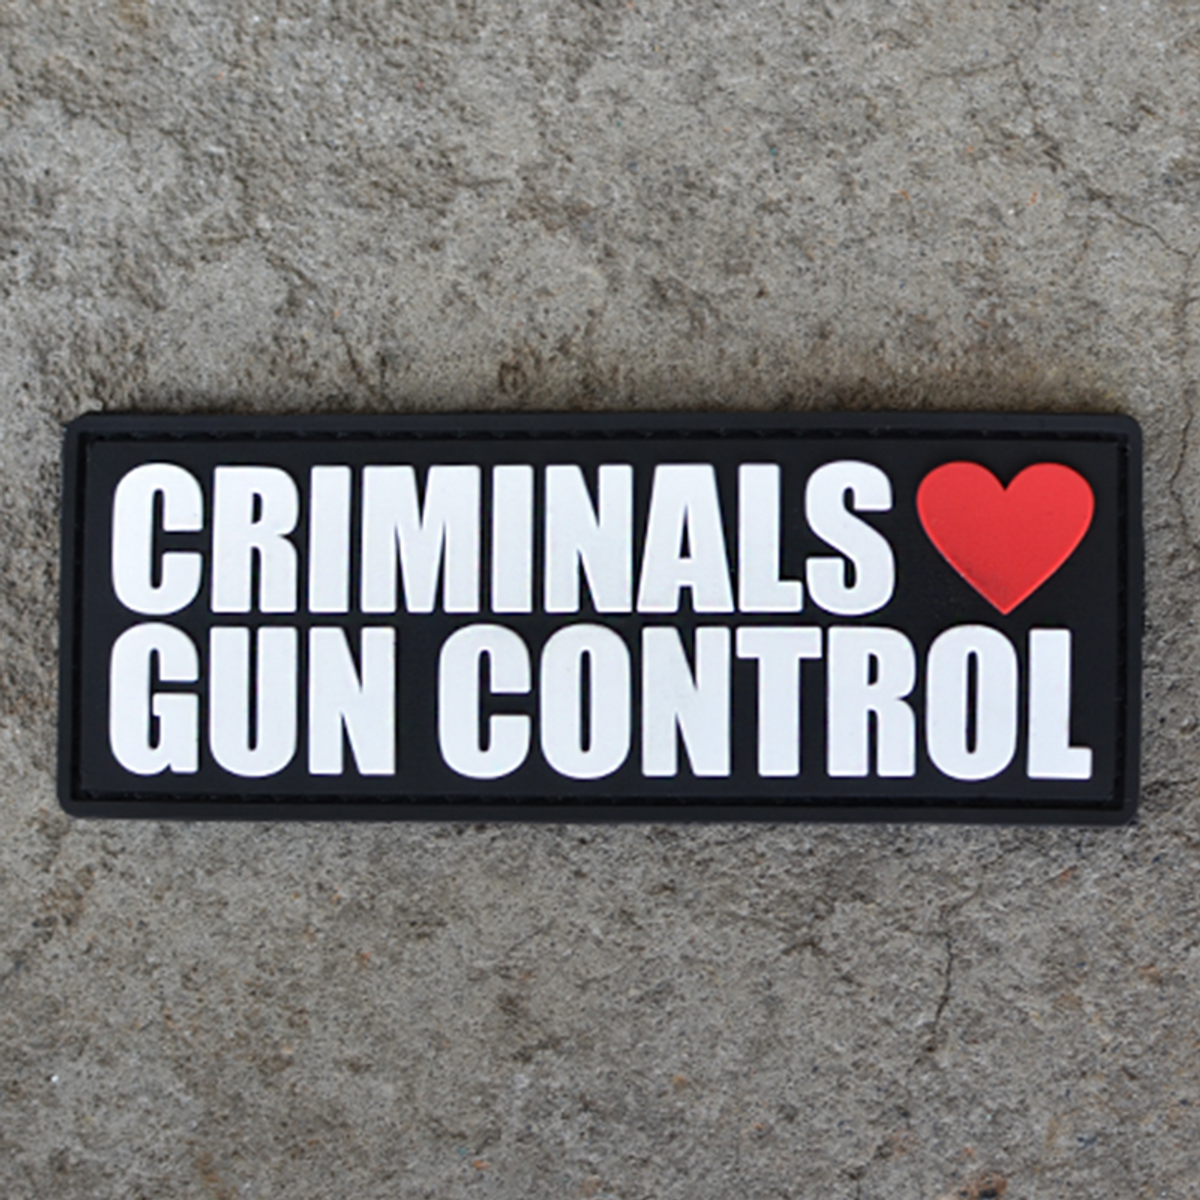 Is Gun Control Out Of Control?